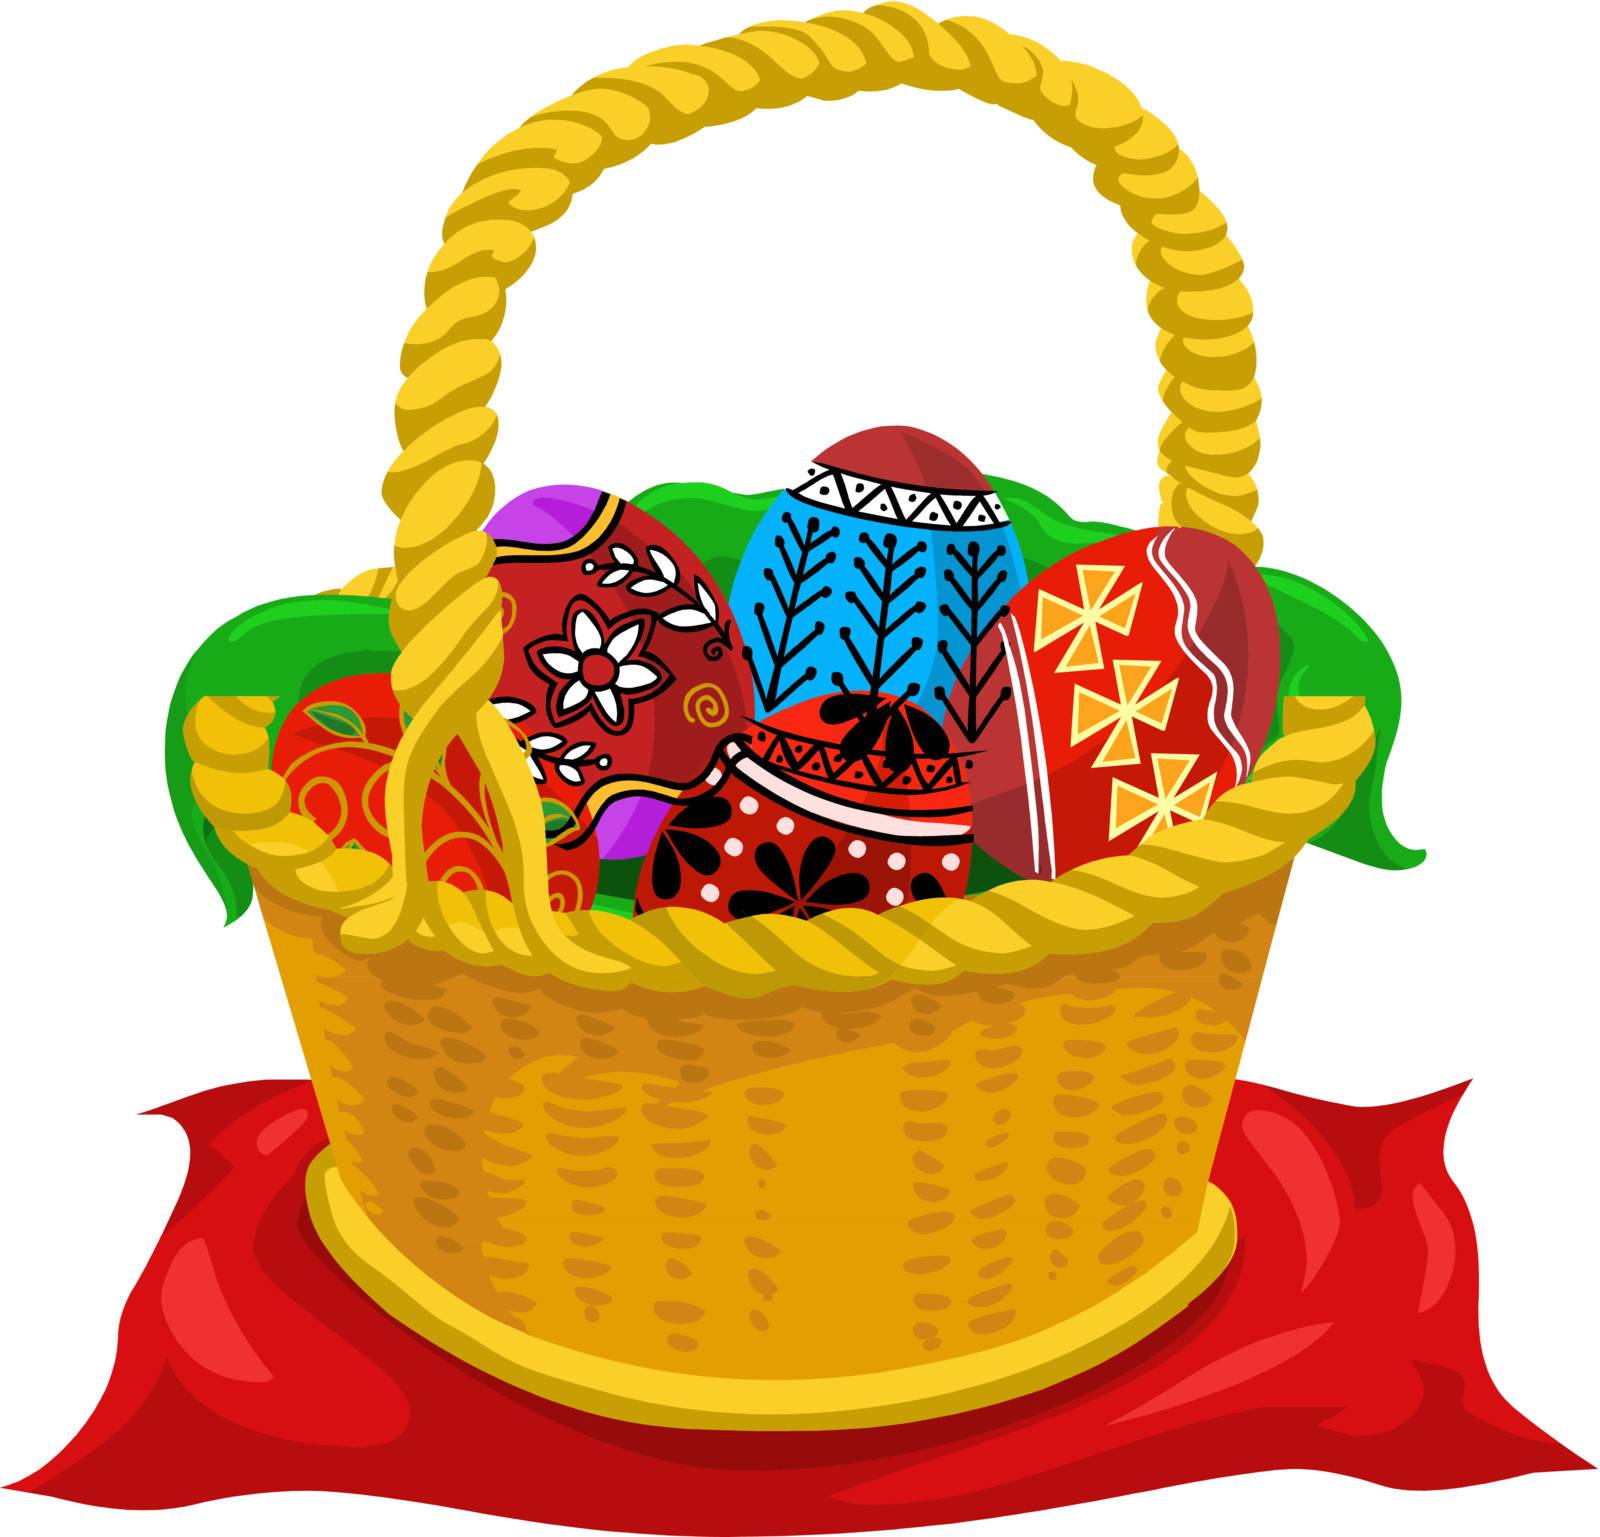 Easter eggs, yellow basket, colorful, vector illustration